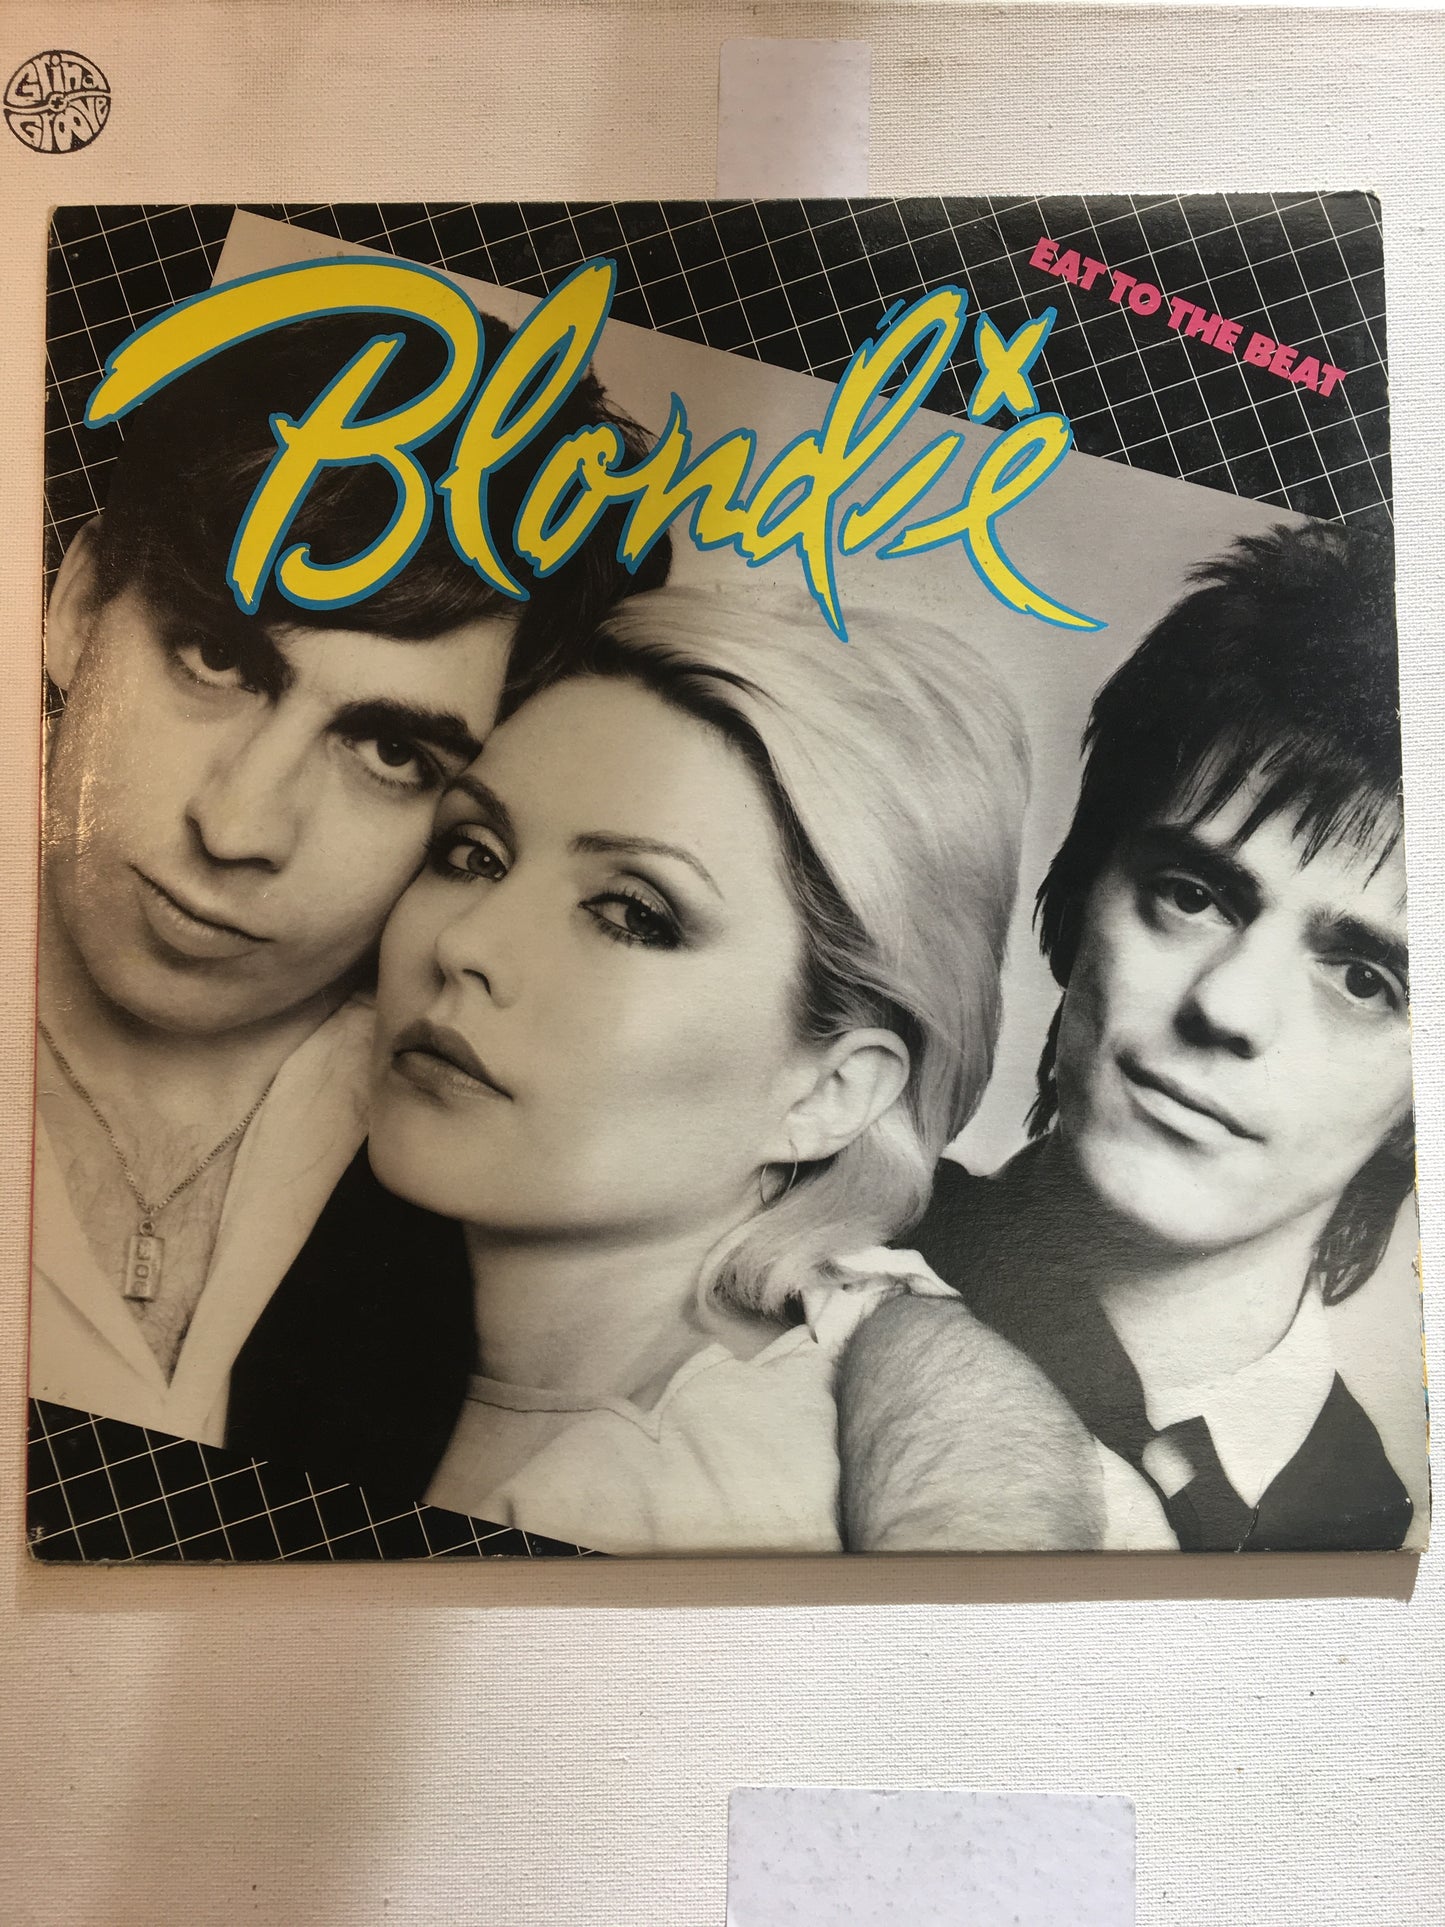 Blondie LP 1979 EAT TO THE BEAT